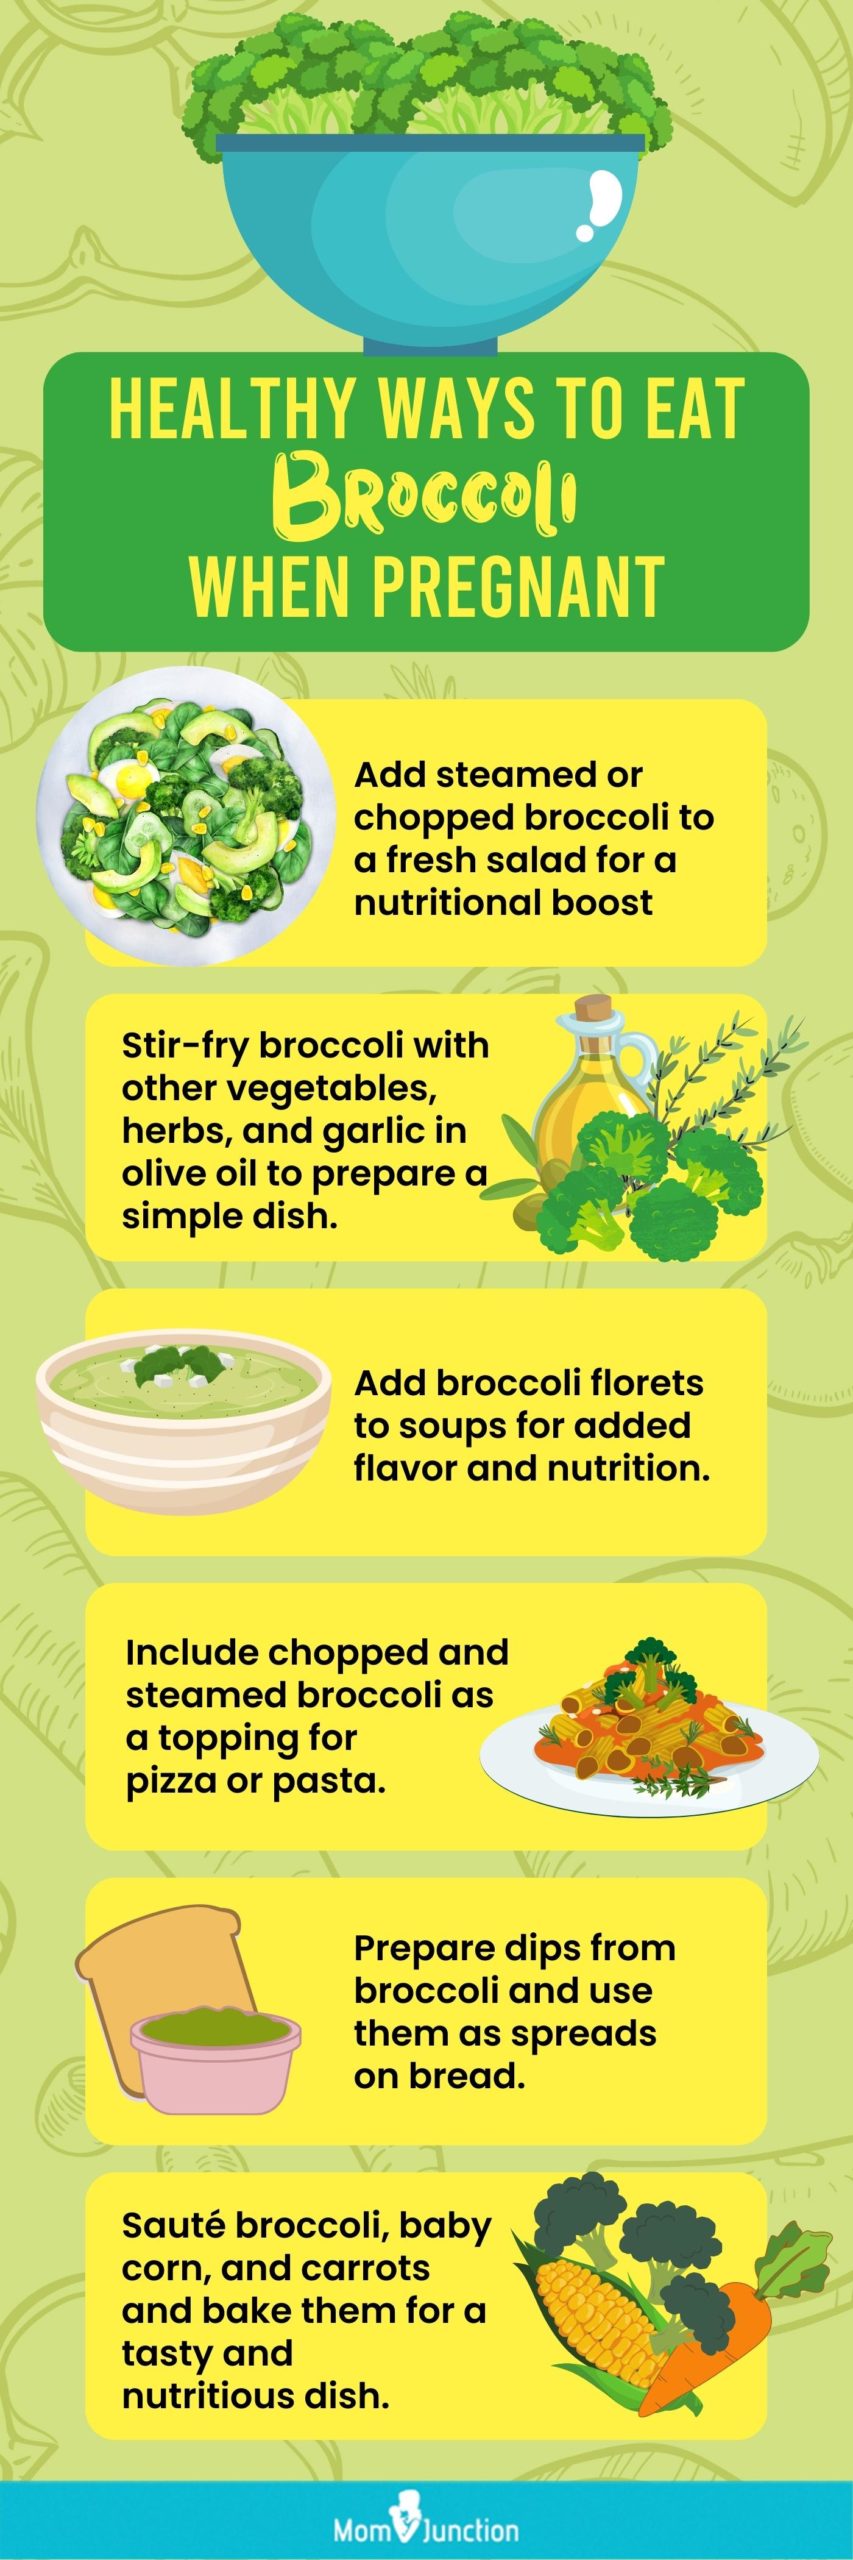 healthy ways to eat broccoli when pregnant (infographic)